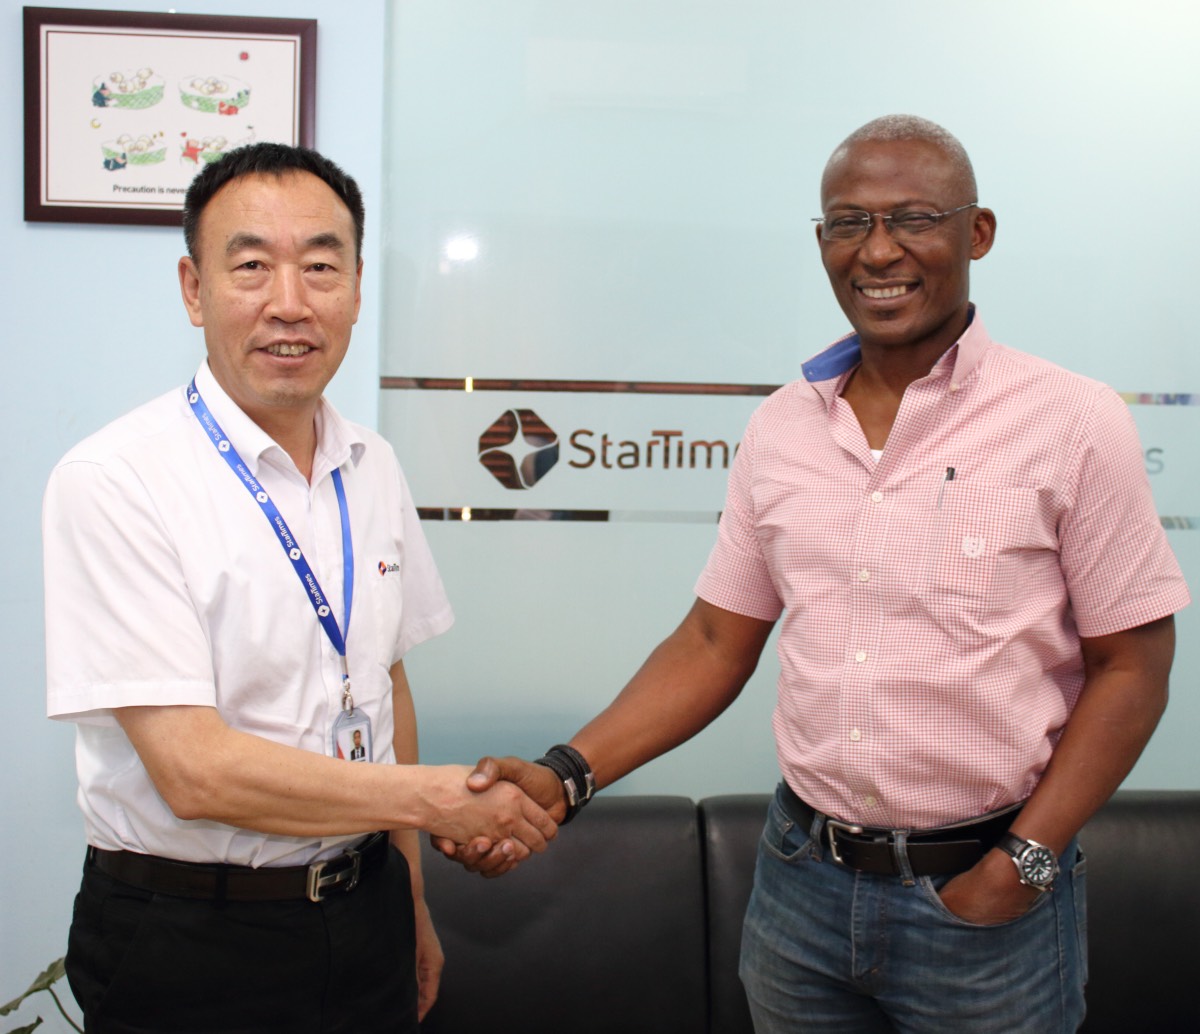 David Zhang, the chief executive officer, StarTimes NigeriaKayode Akintemi, the managing director and editor-at-chief at Plus TV Africa,